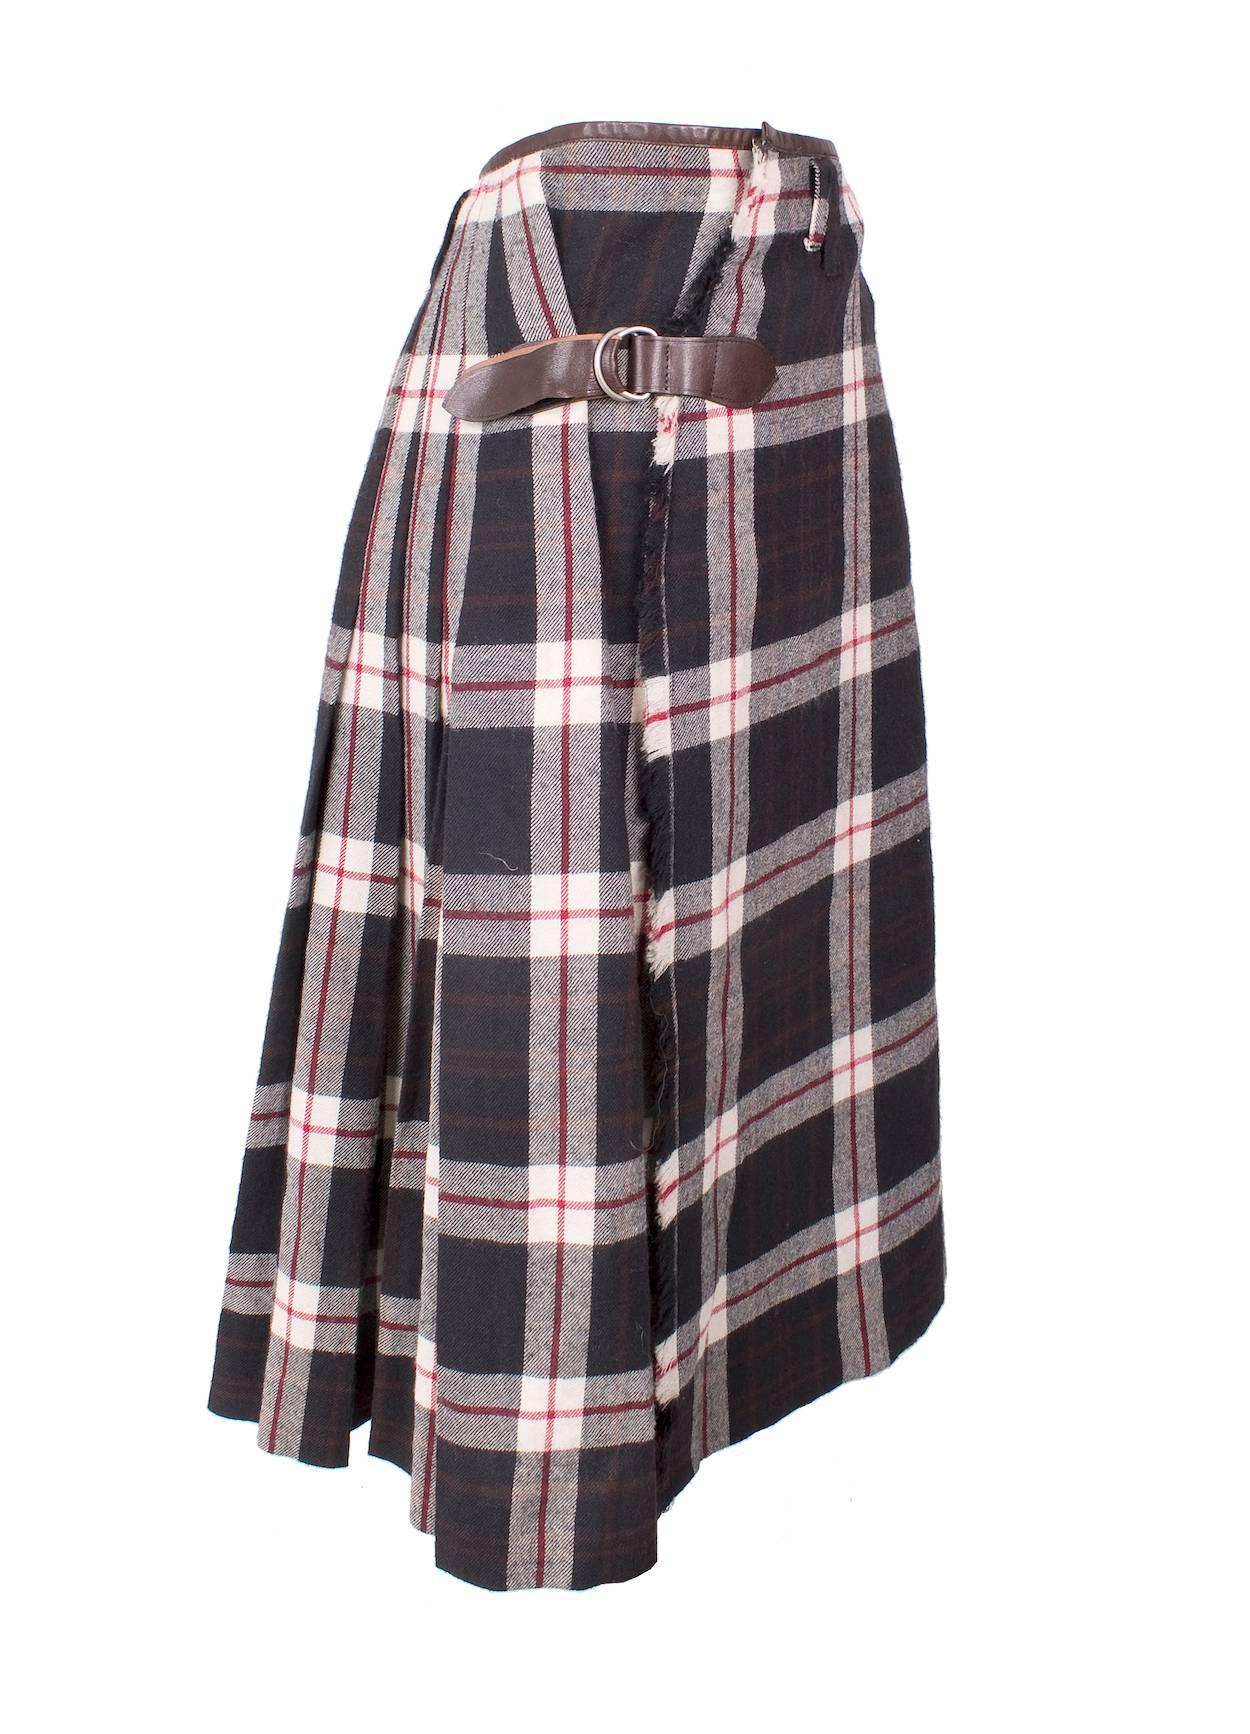 This is a wool kilt by Jean Paul Gaultier c. 1990s.  It features a red white and navy plaid with brown leather trimming.  The back is pleated and there is frayed edges in front.  The skirt wraps around and closes with buttons, hook and latch, and a